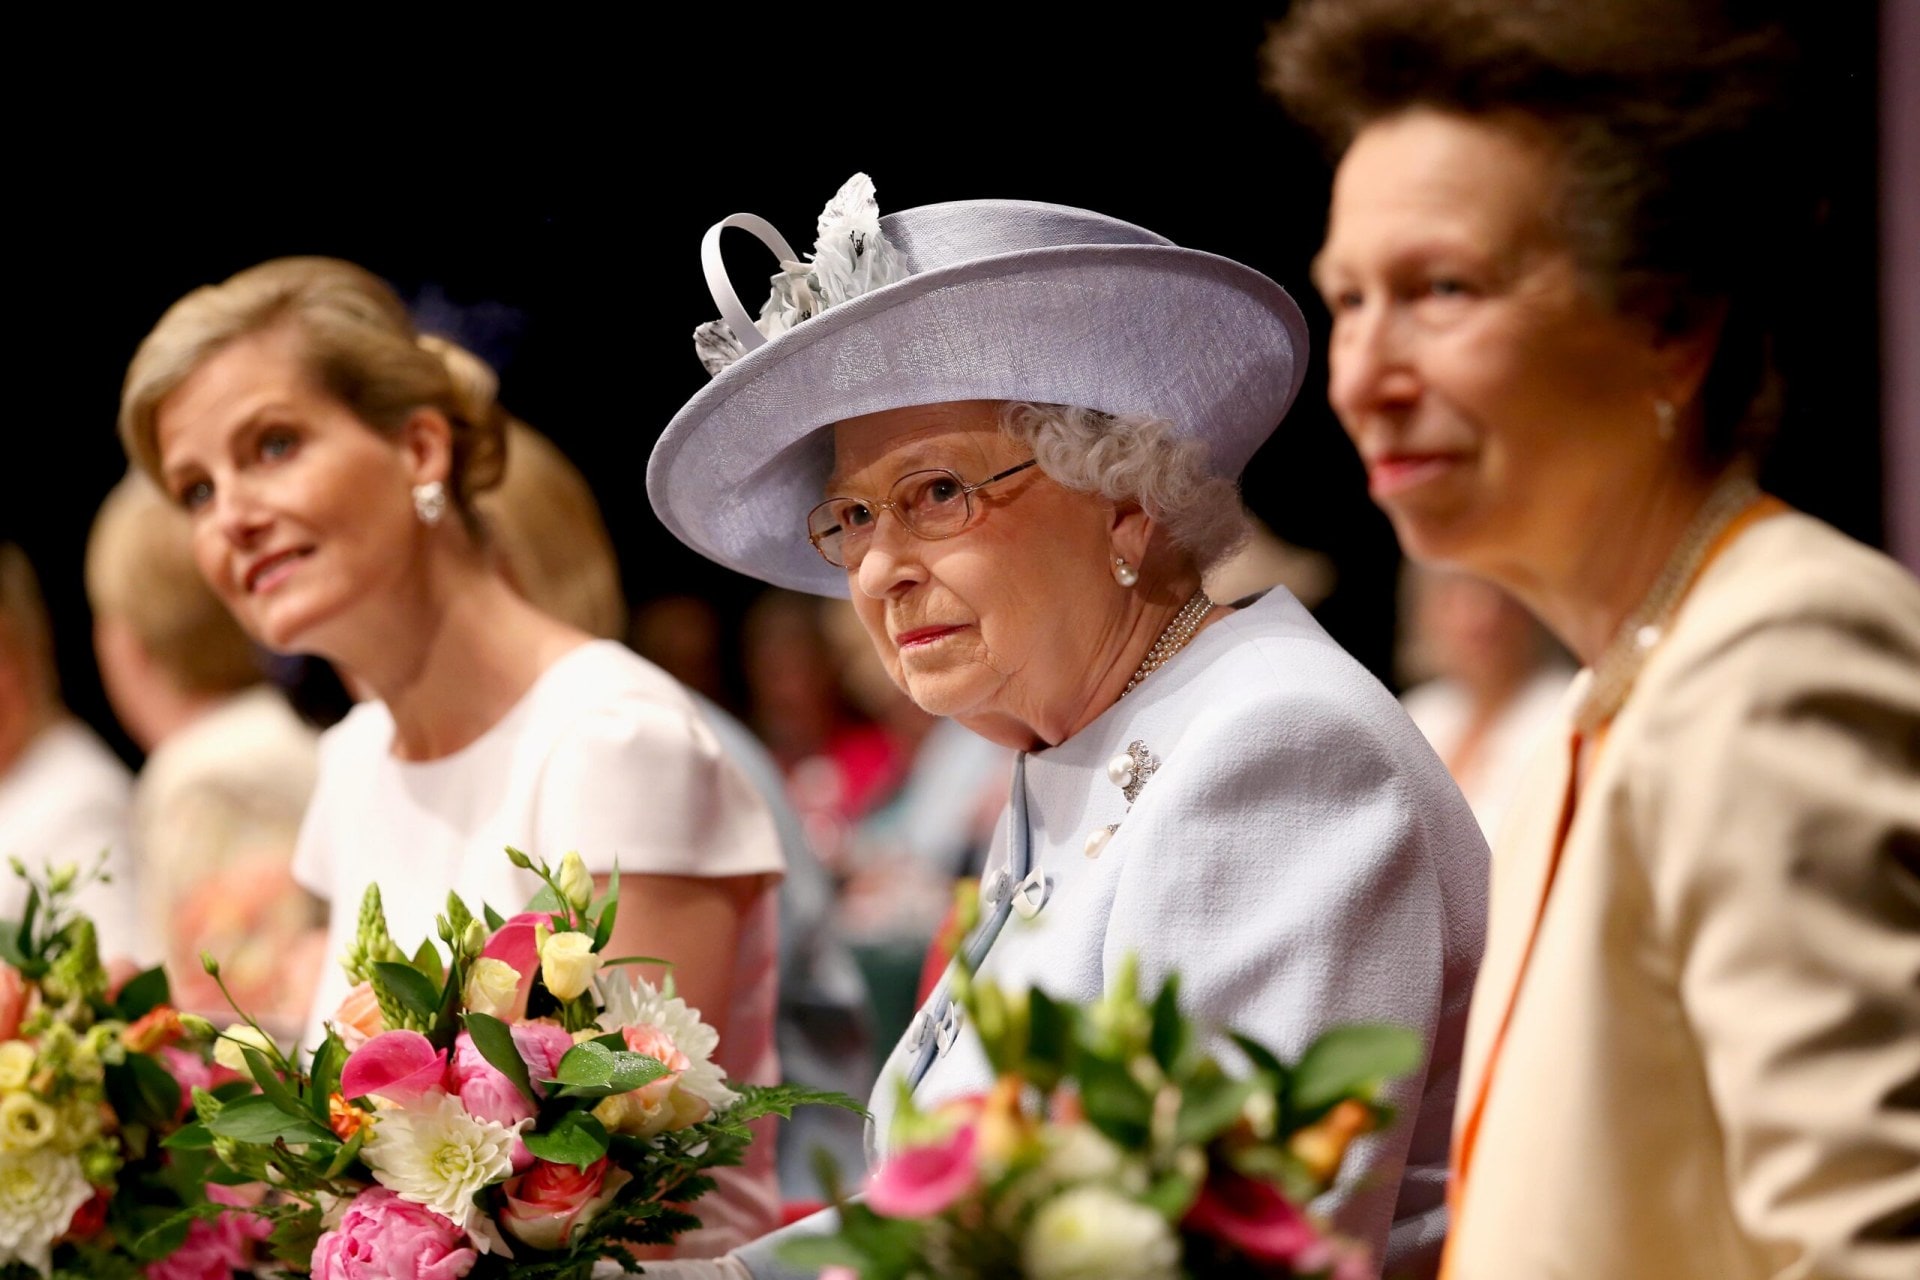 Sophie, Countess of Wessex, Princess Anne, Princess Royal and Queen Elizabeth II sitting at a flower covered table together at Women's Institute Celebrating 100 Years cake at the Centenary Annual Meeting of The National Federation Of Women's Institute at Royal Albert Hall